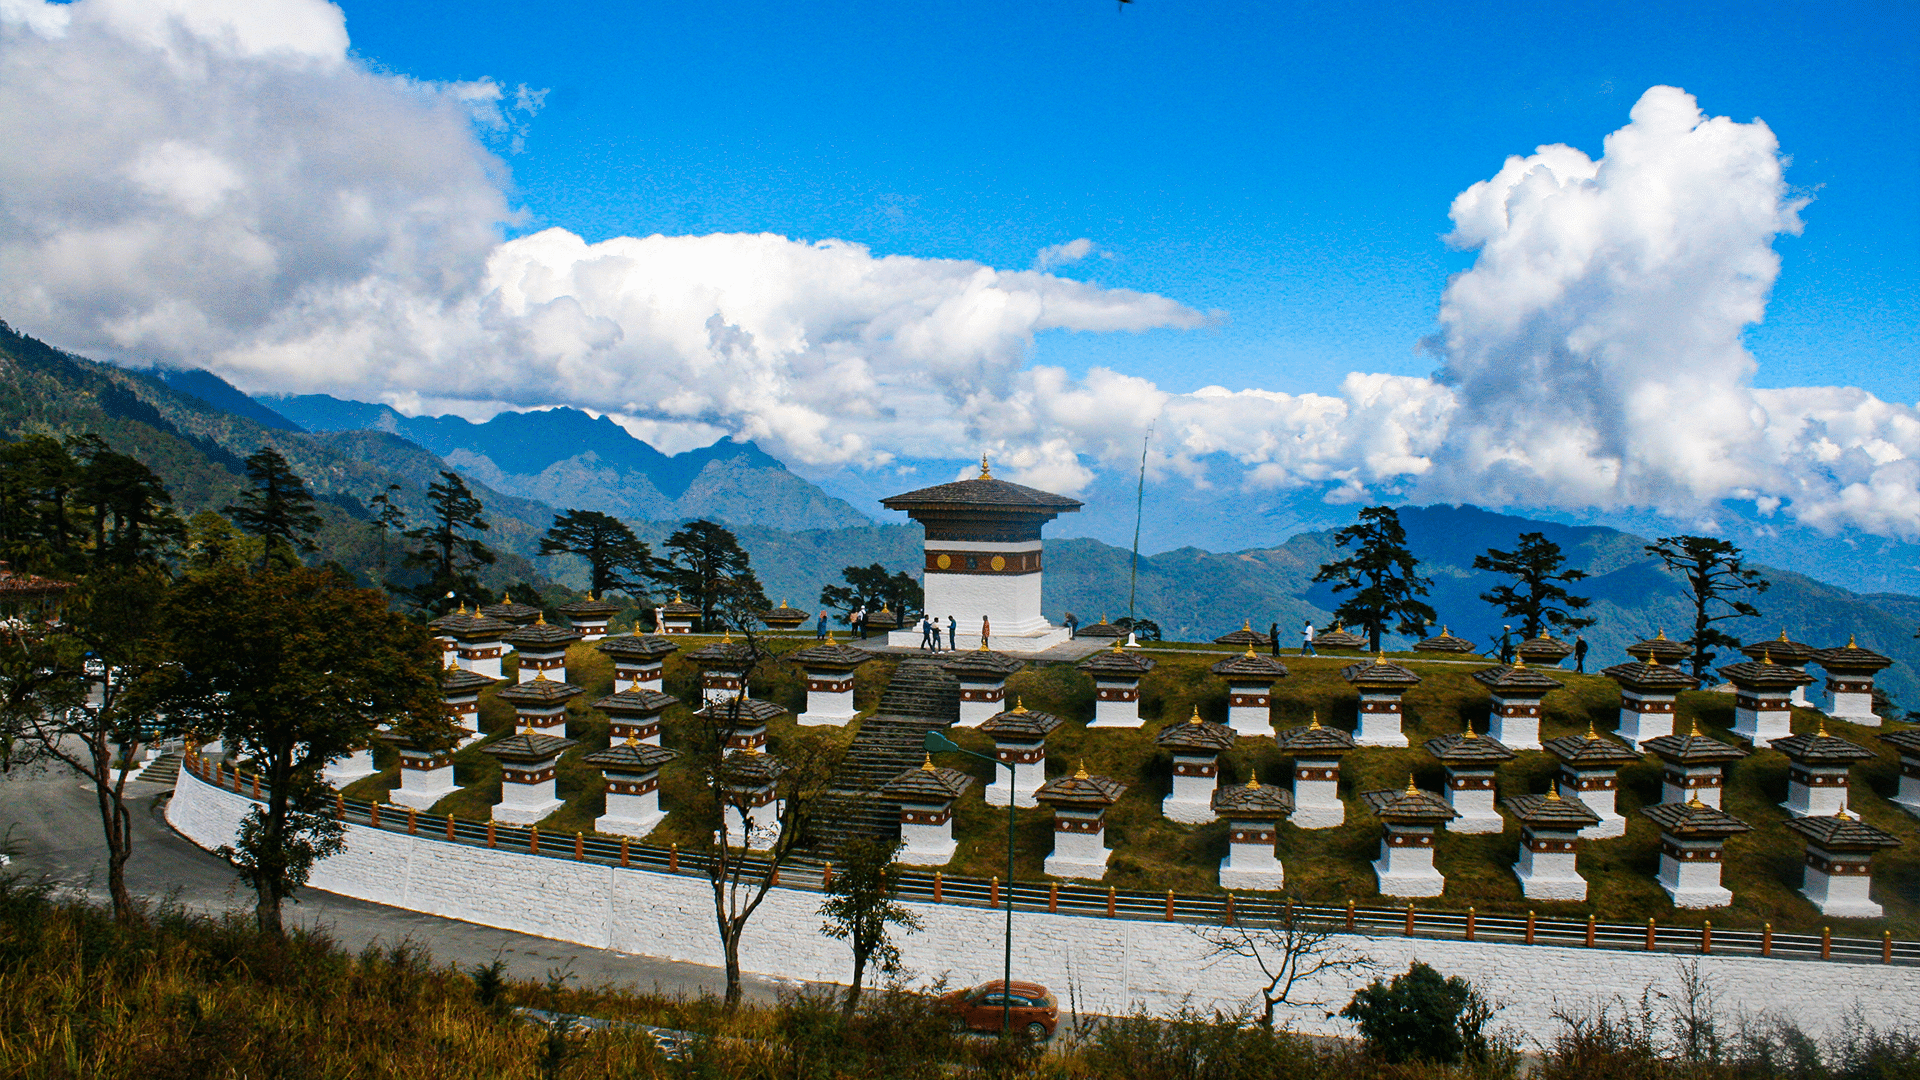 Go on the Bumthang Cultural Trek